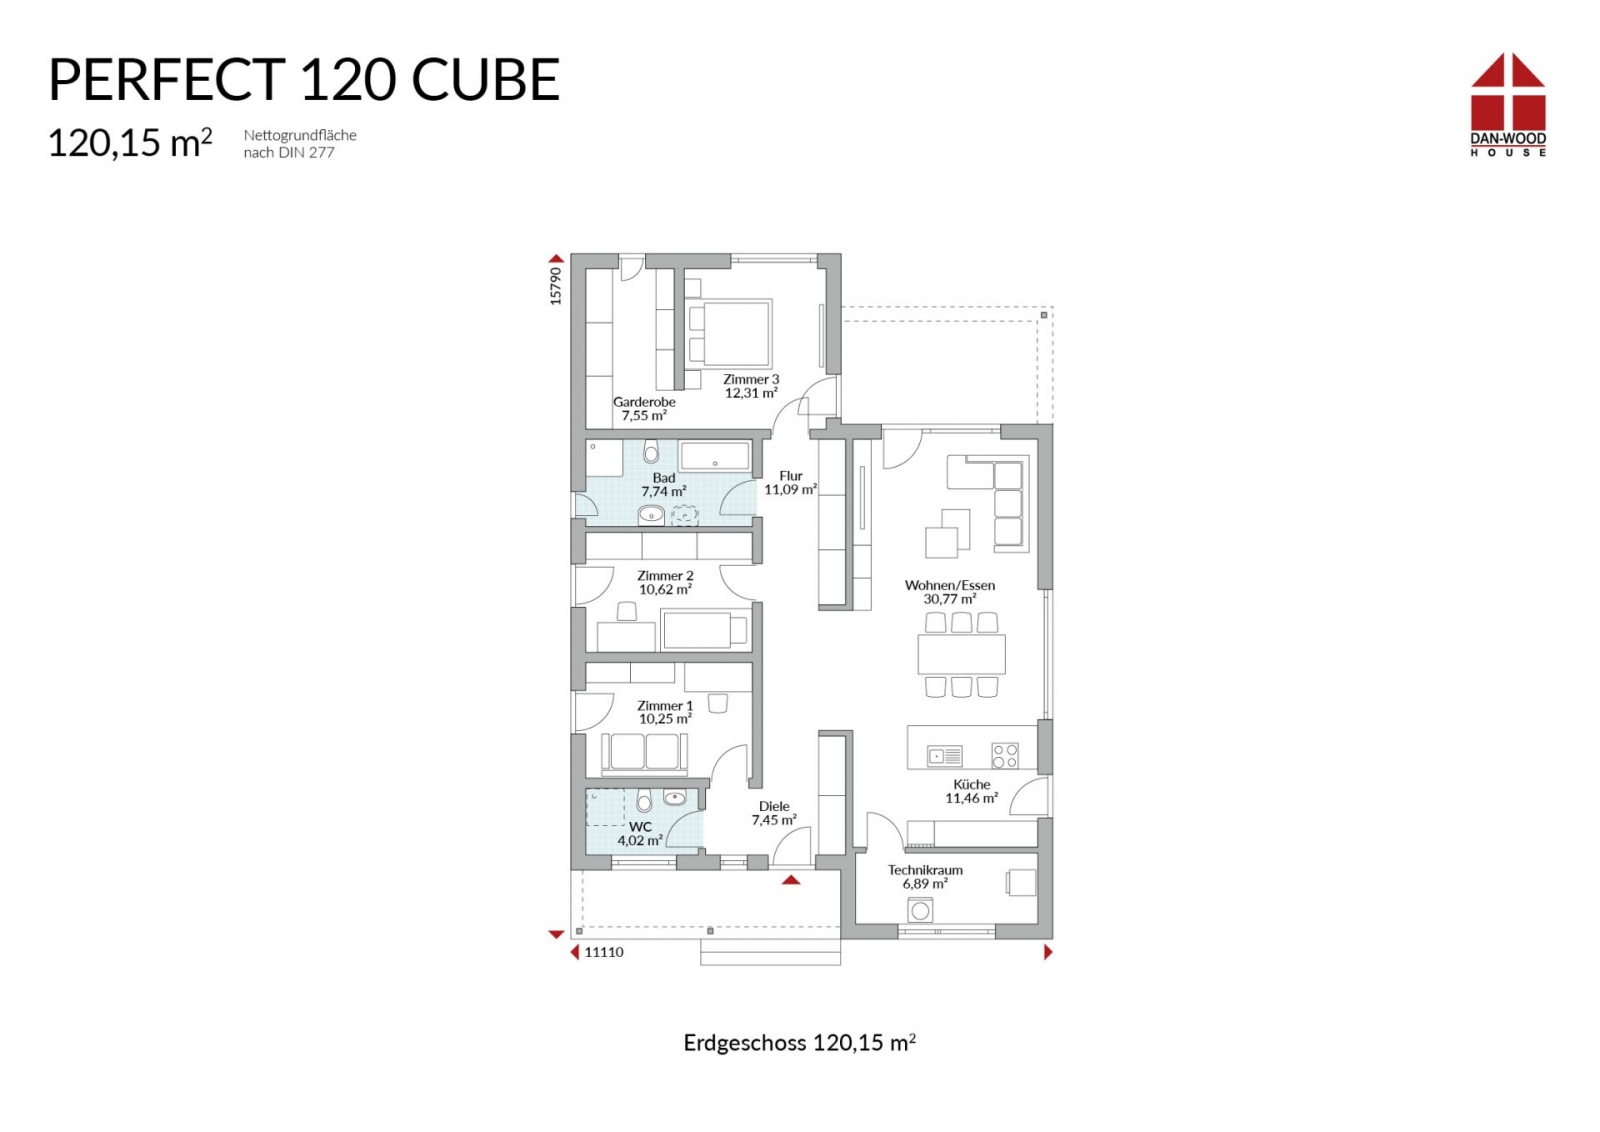 Bungalow Perfect 120 Cube